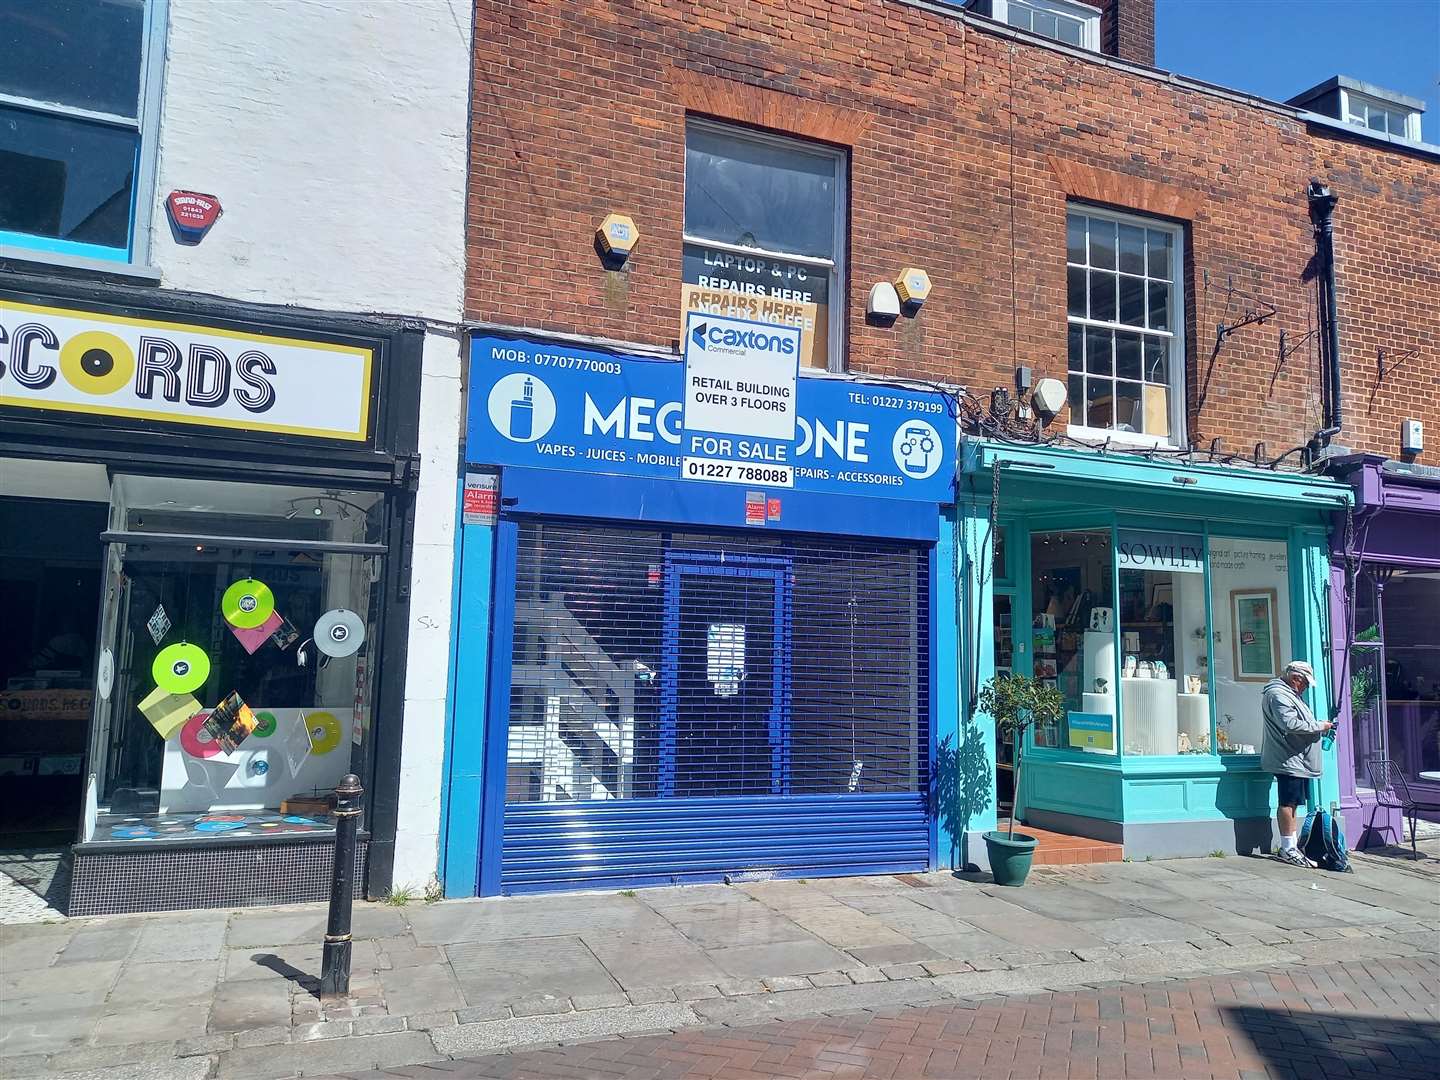 The council is not a fan of the Megafone store, which shut before investigations into its design could be carried out